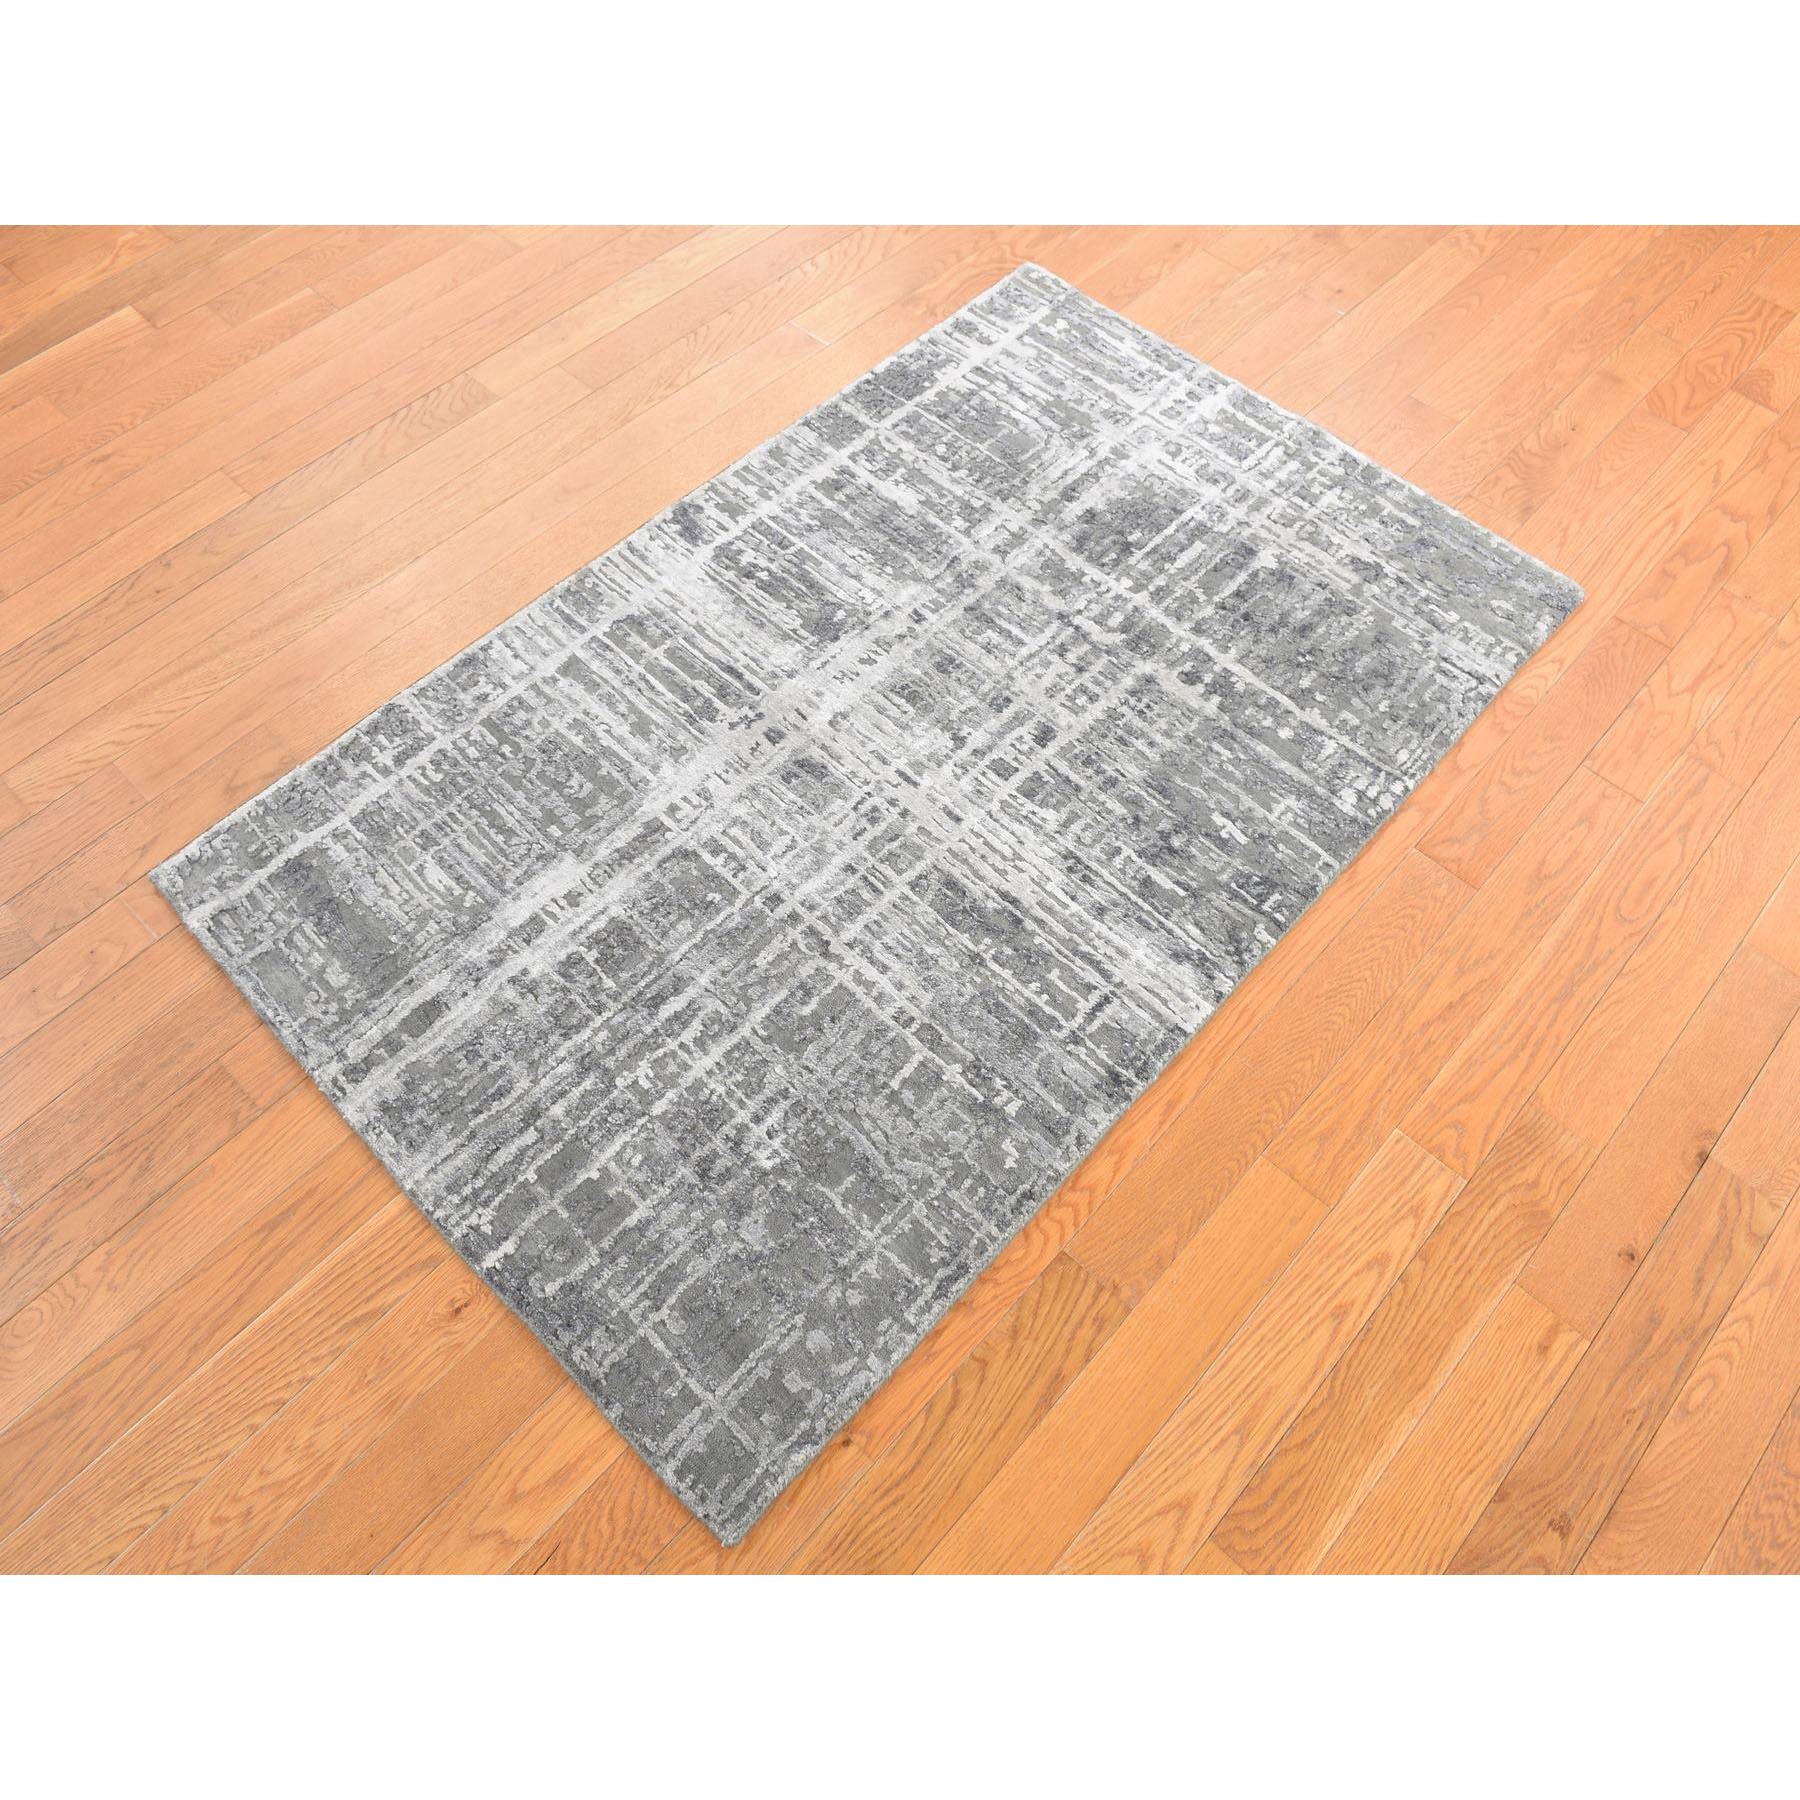  Silk Hand-Knotted Area Rug 3'1